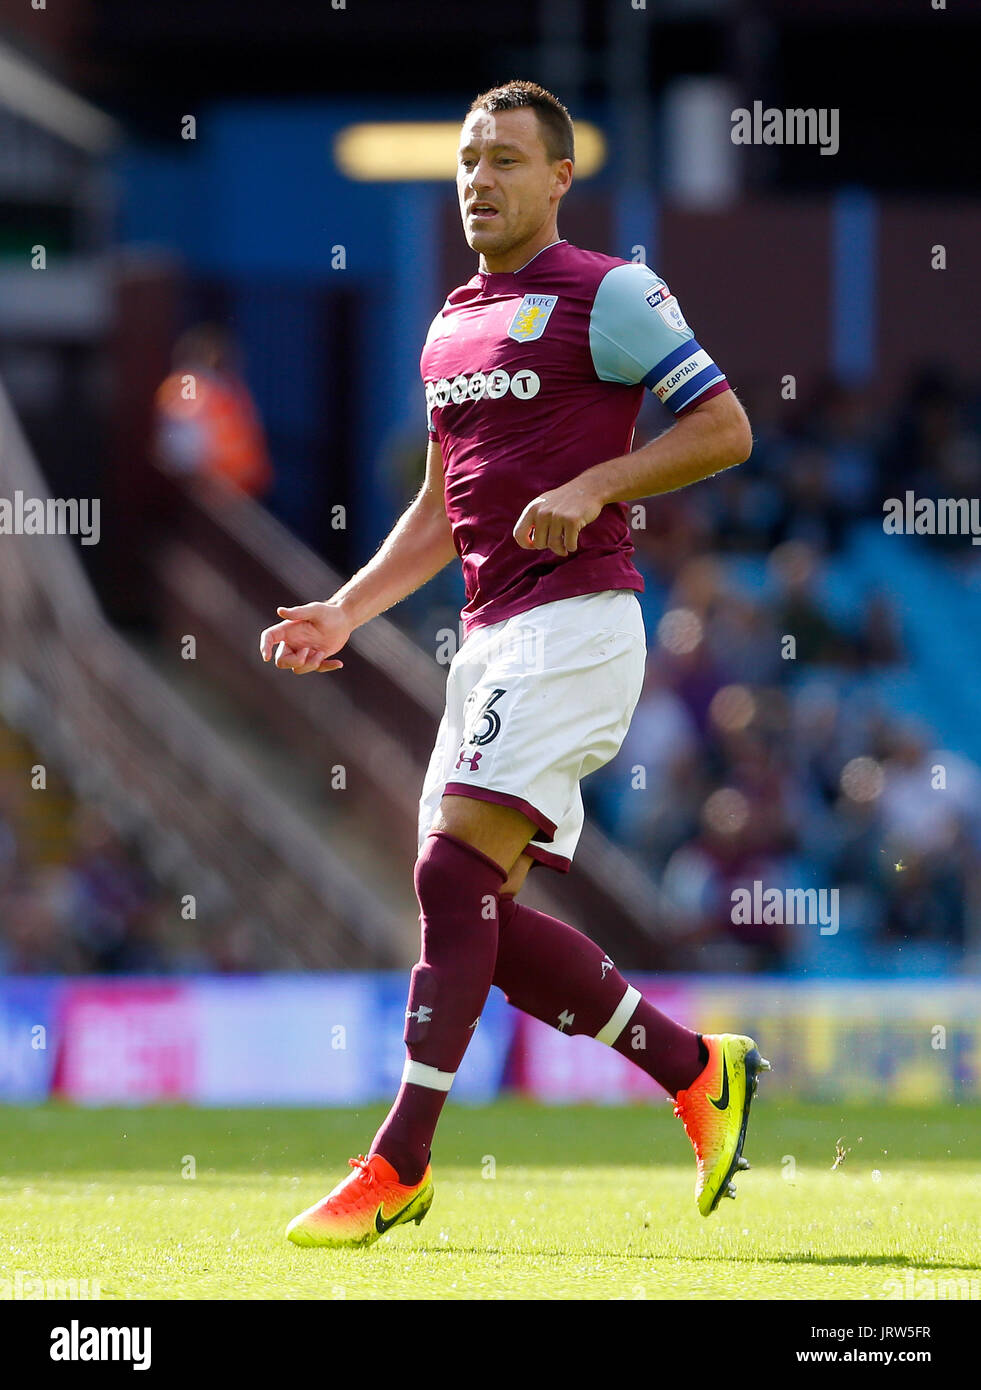 Aston Villa's John Terry during the Sky Bet Championship match at Villa Park, Birmingham. PRESS ASSOCIATION Photo. Picture date: Saturday August 5, 2017. See PA story SOCCER Villa. Photo credit should read: Paul Thomas/PA Wire. RESTRICTIONS: EDITORIAL USE ONLY No use with unauthorised audio, video, data, fixture lists, club/league logos or 'live' services. Online in-match use limited to 75 images, no video emulation. No use in betting, games or single club/league/player publications. Stock Photo